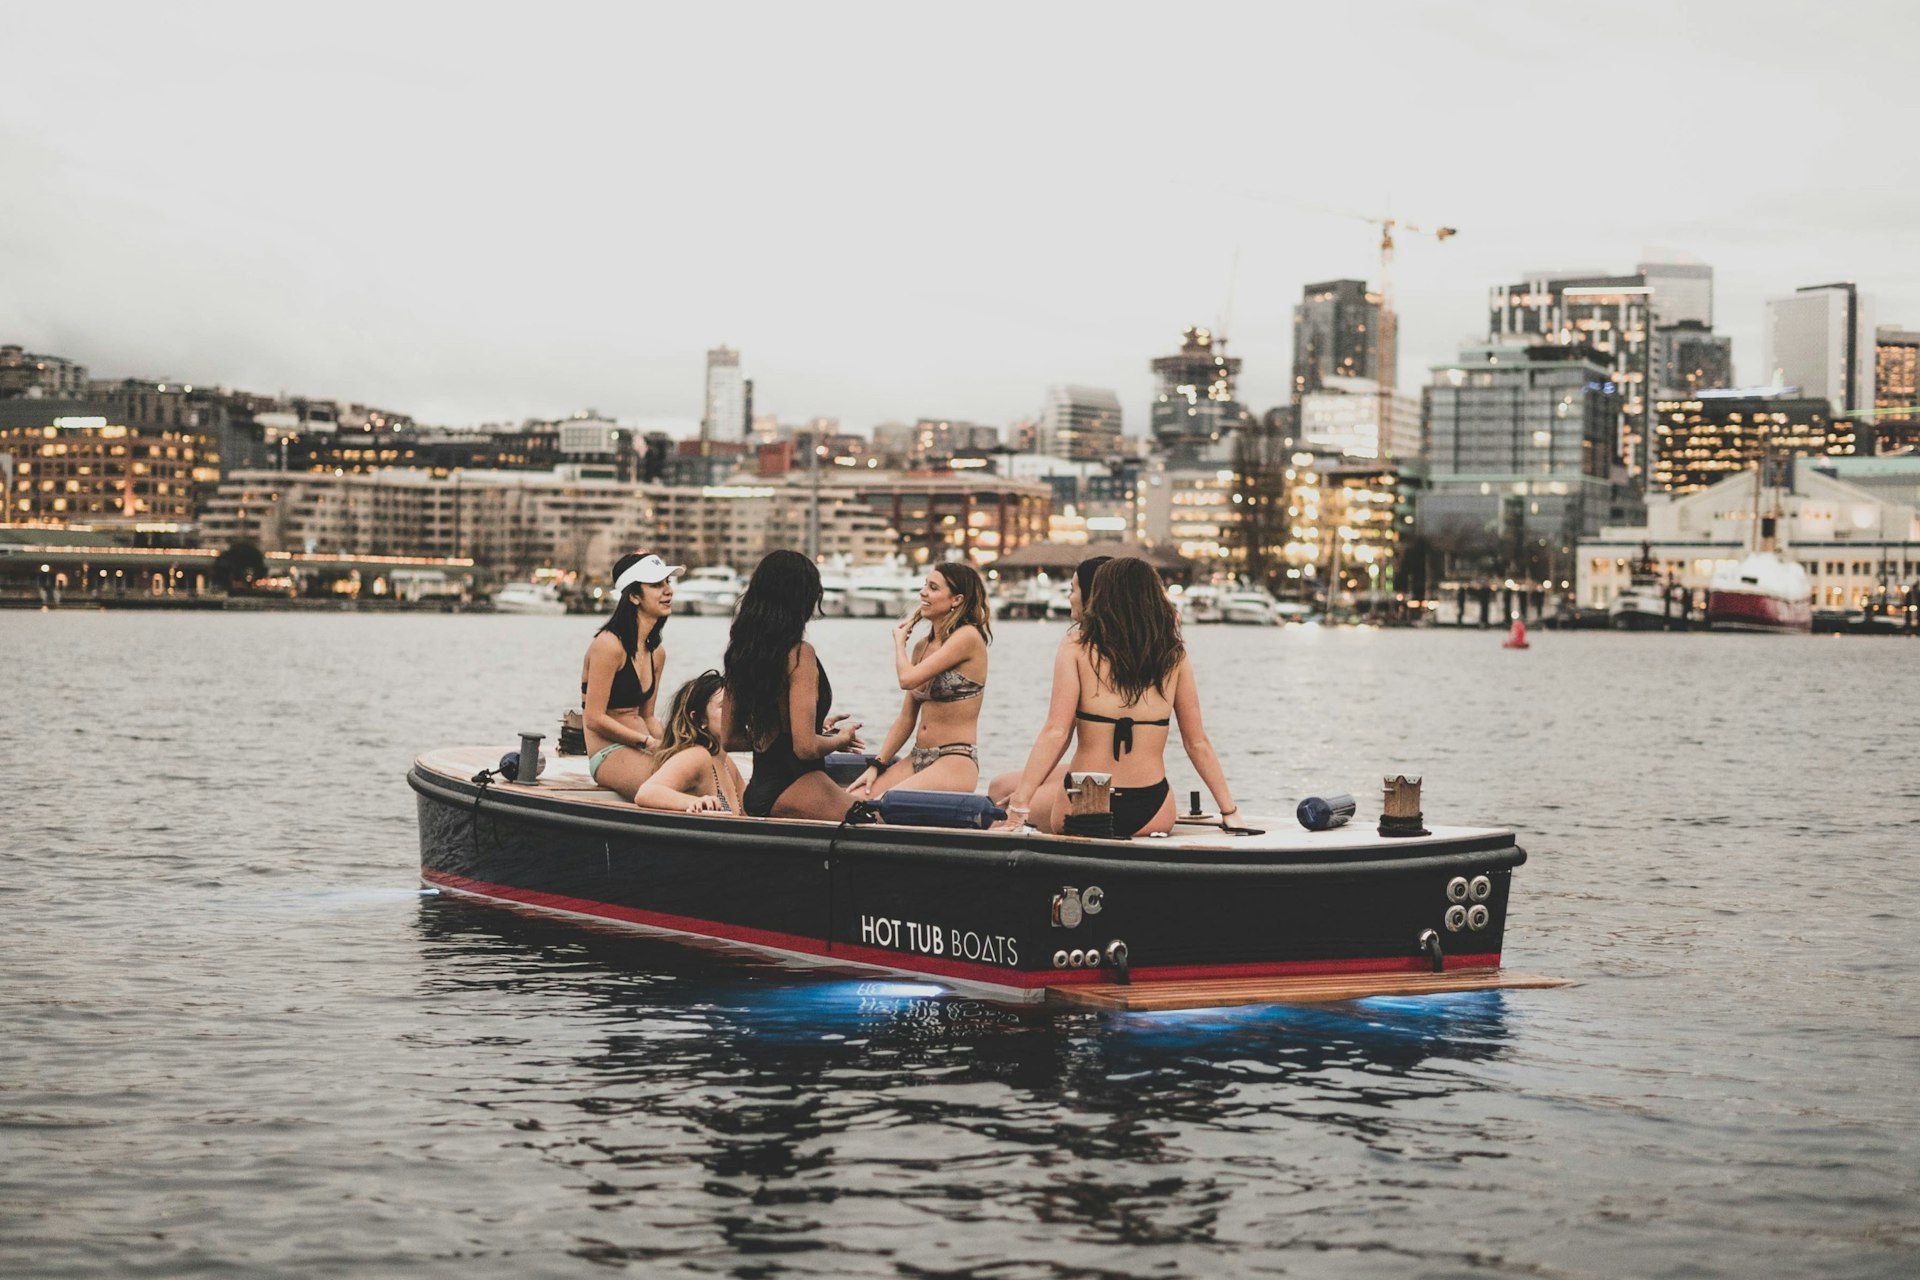 Four girls sitting on the edge of a hot tub boat